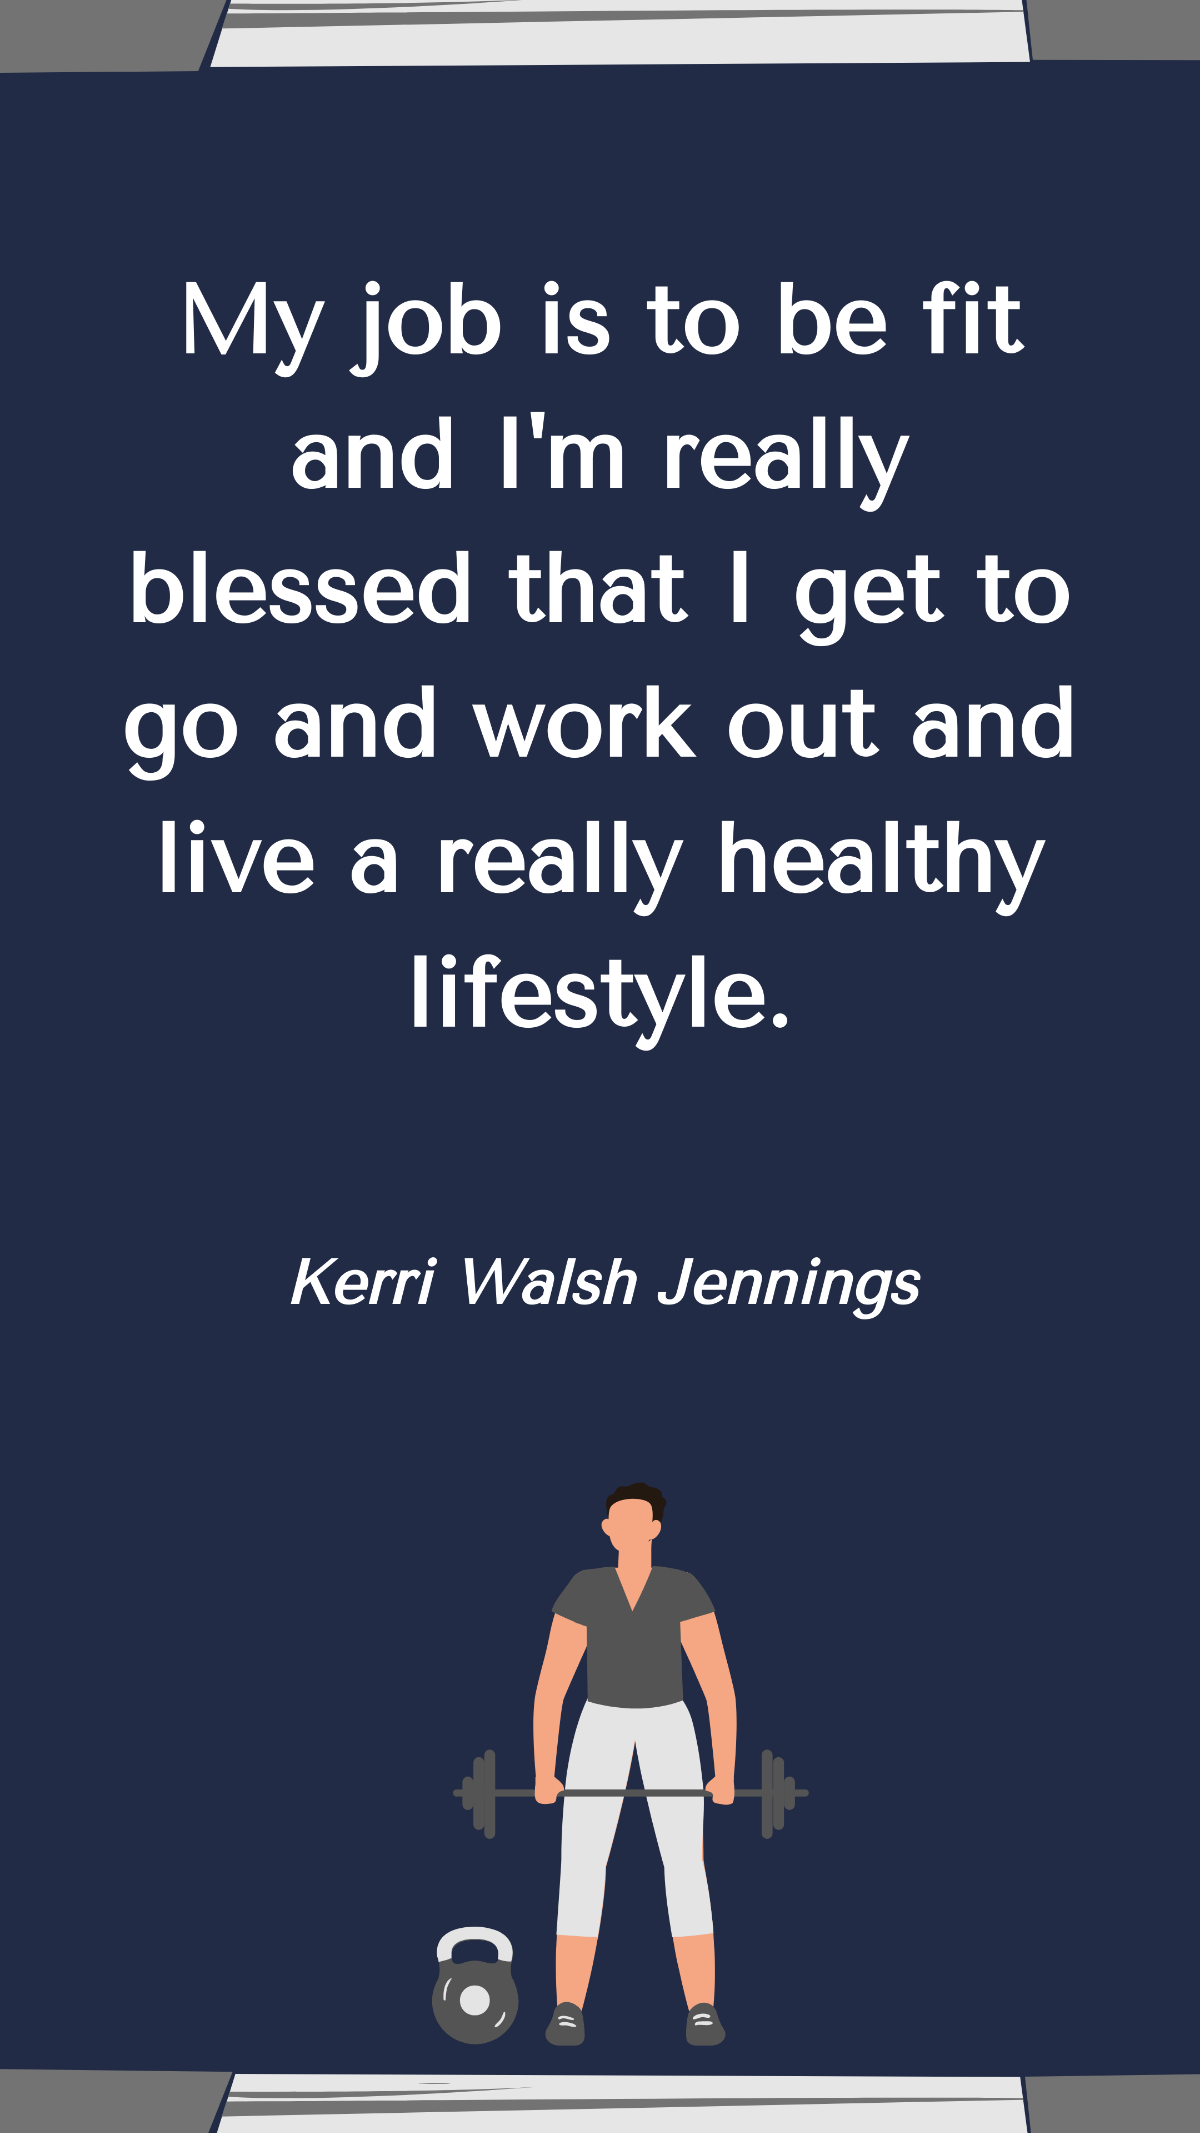 Free Kerri Walsh Jennings - My job is to be fit and I'm really blessed that I get to go and work out and live a really healthy lifestyle. Template